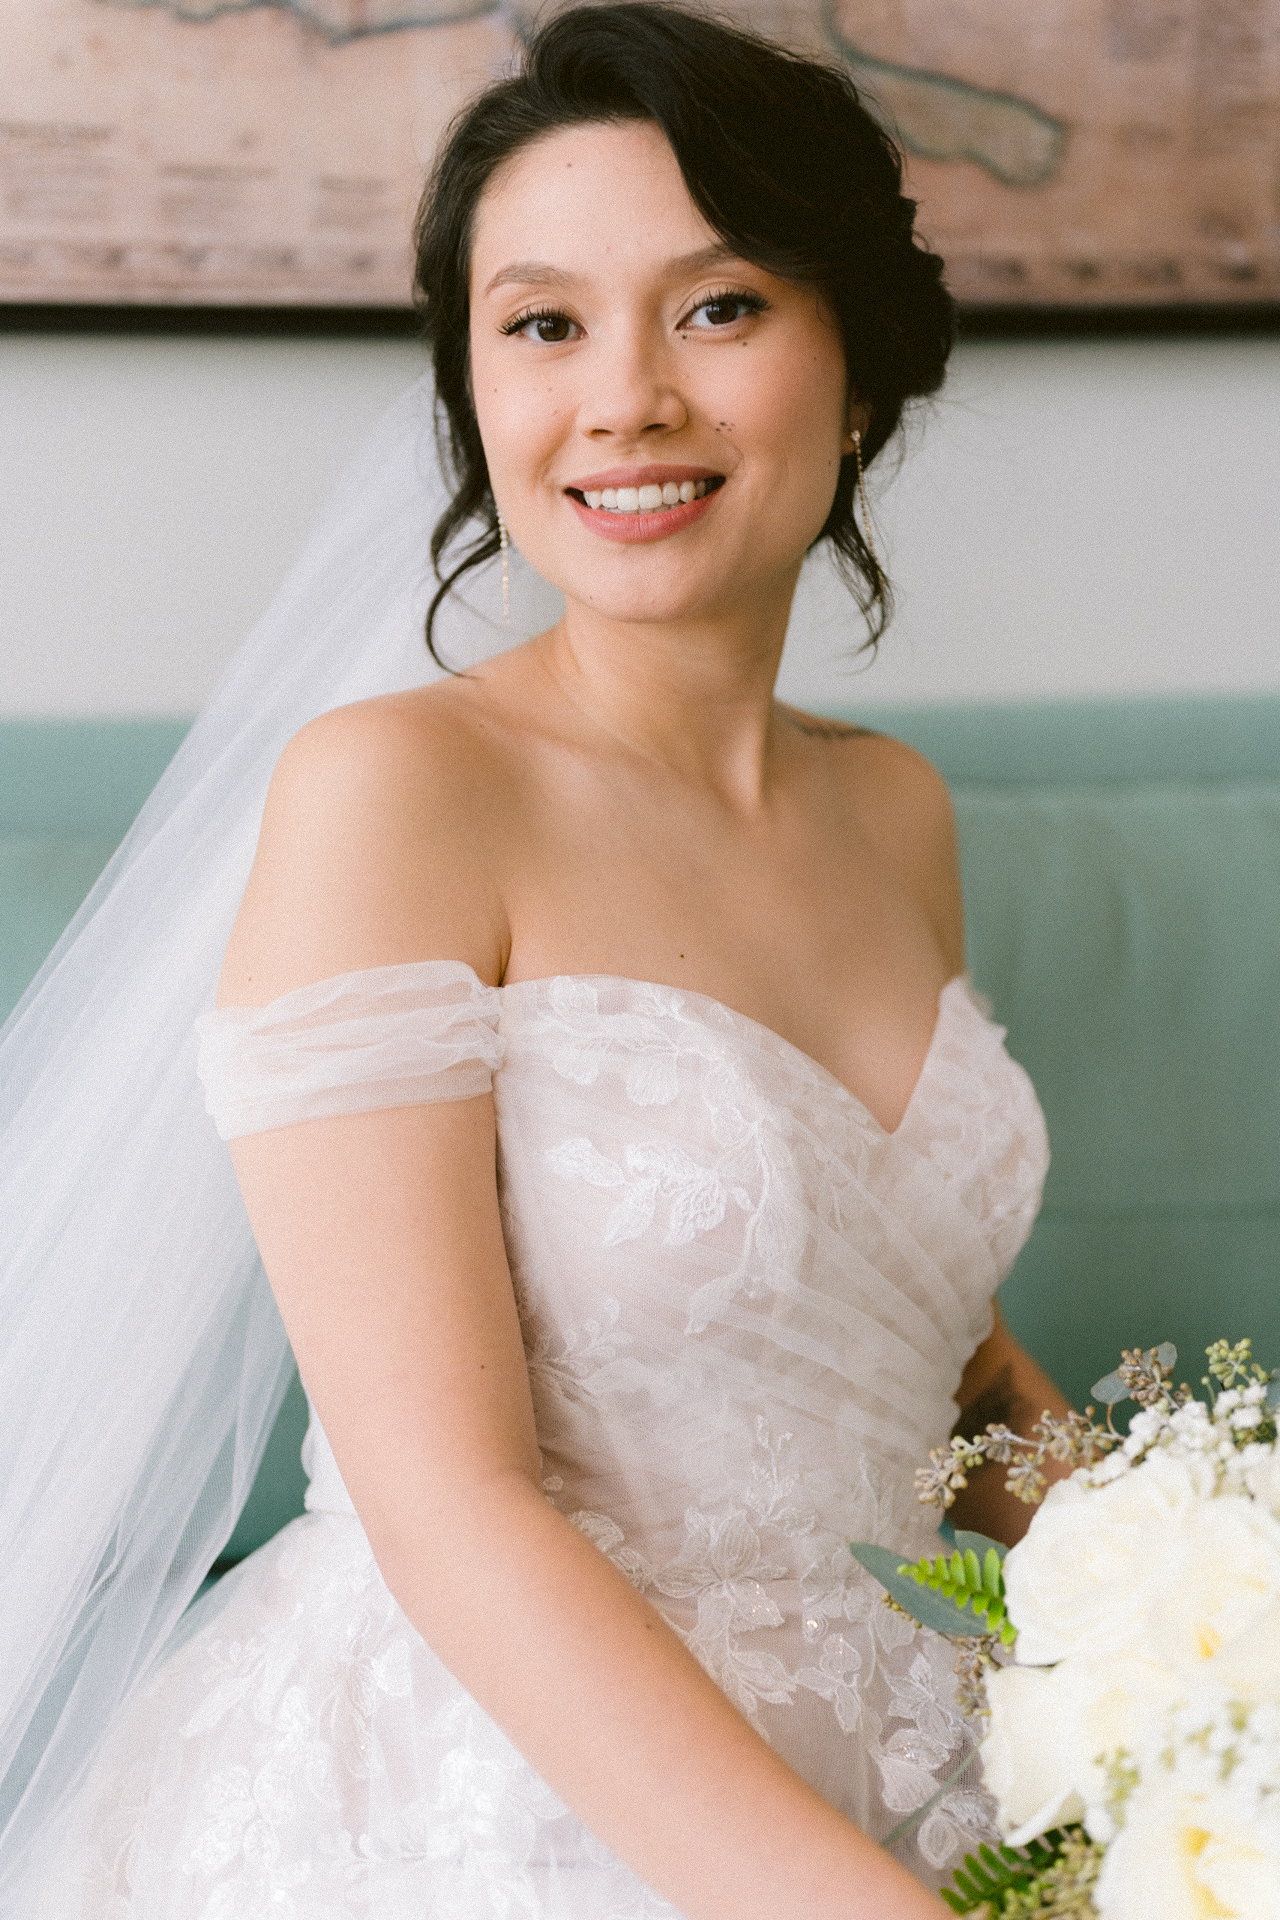 Bride holding a bouquet of white roses